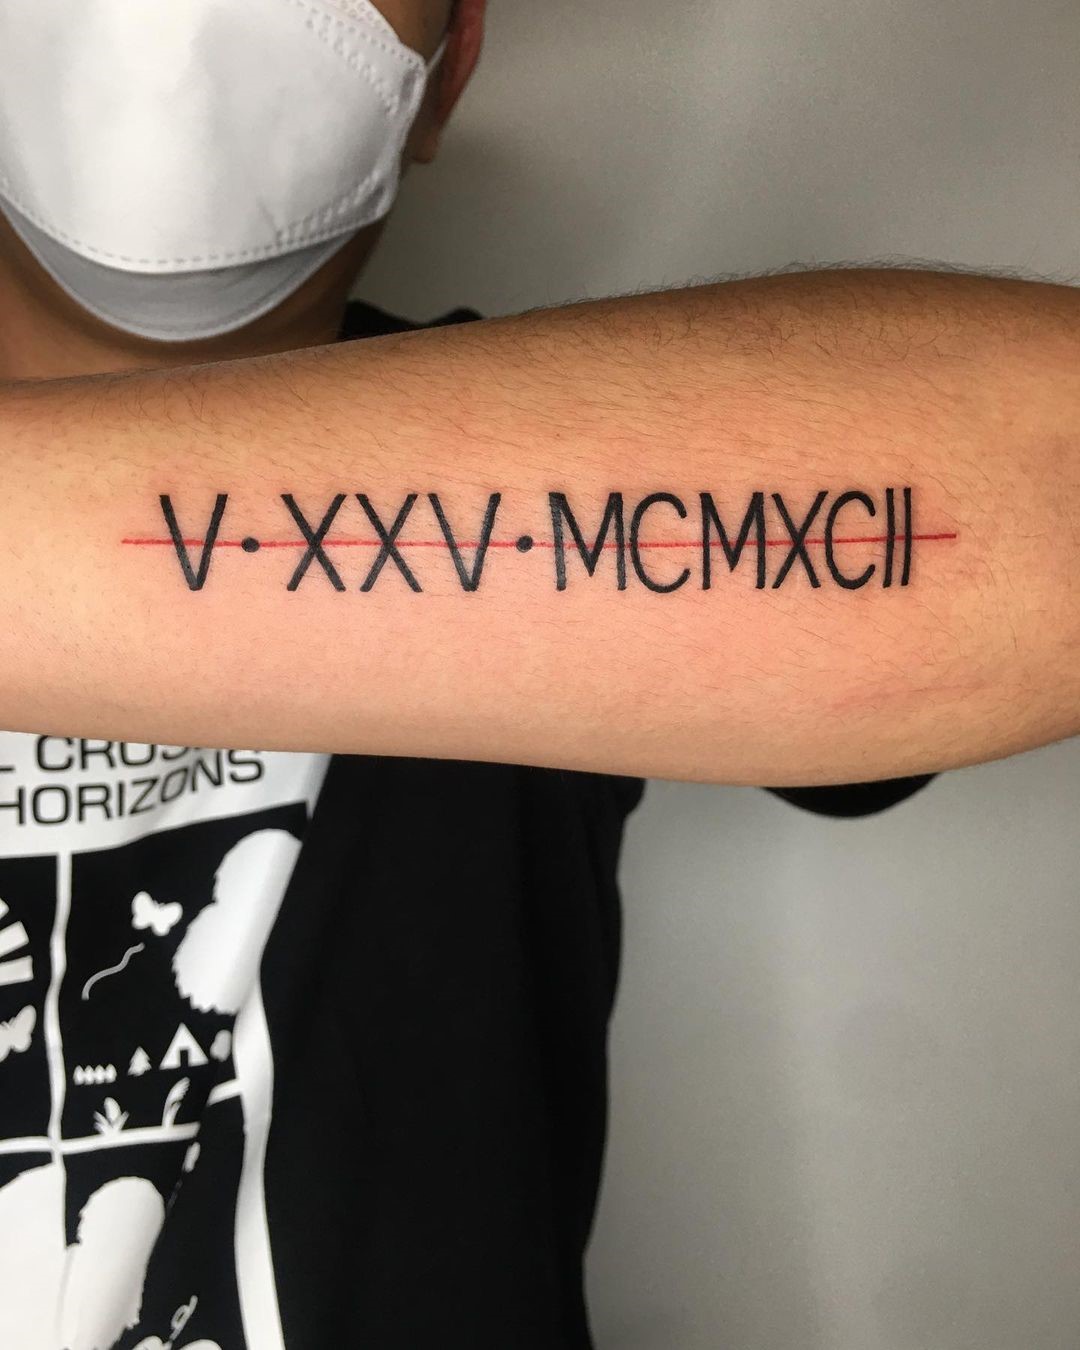 Stunning Roman Numeral Tattoos for People Looking for Some Classic Ink ...